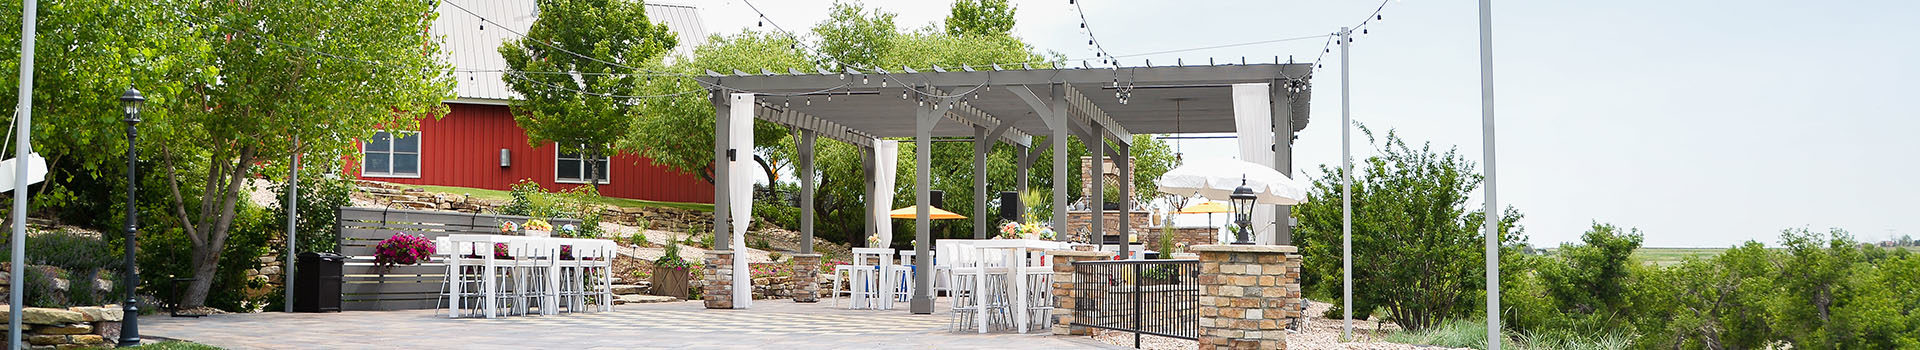 A grey pergola on a stone patio, white table tops with white barstool chairs and a red barn in the background with lots of trees and greenery.